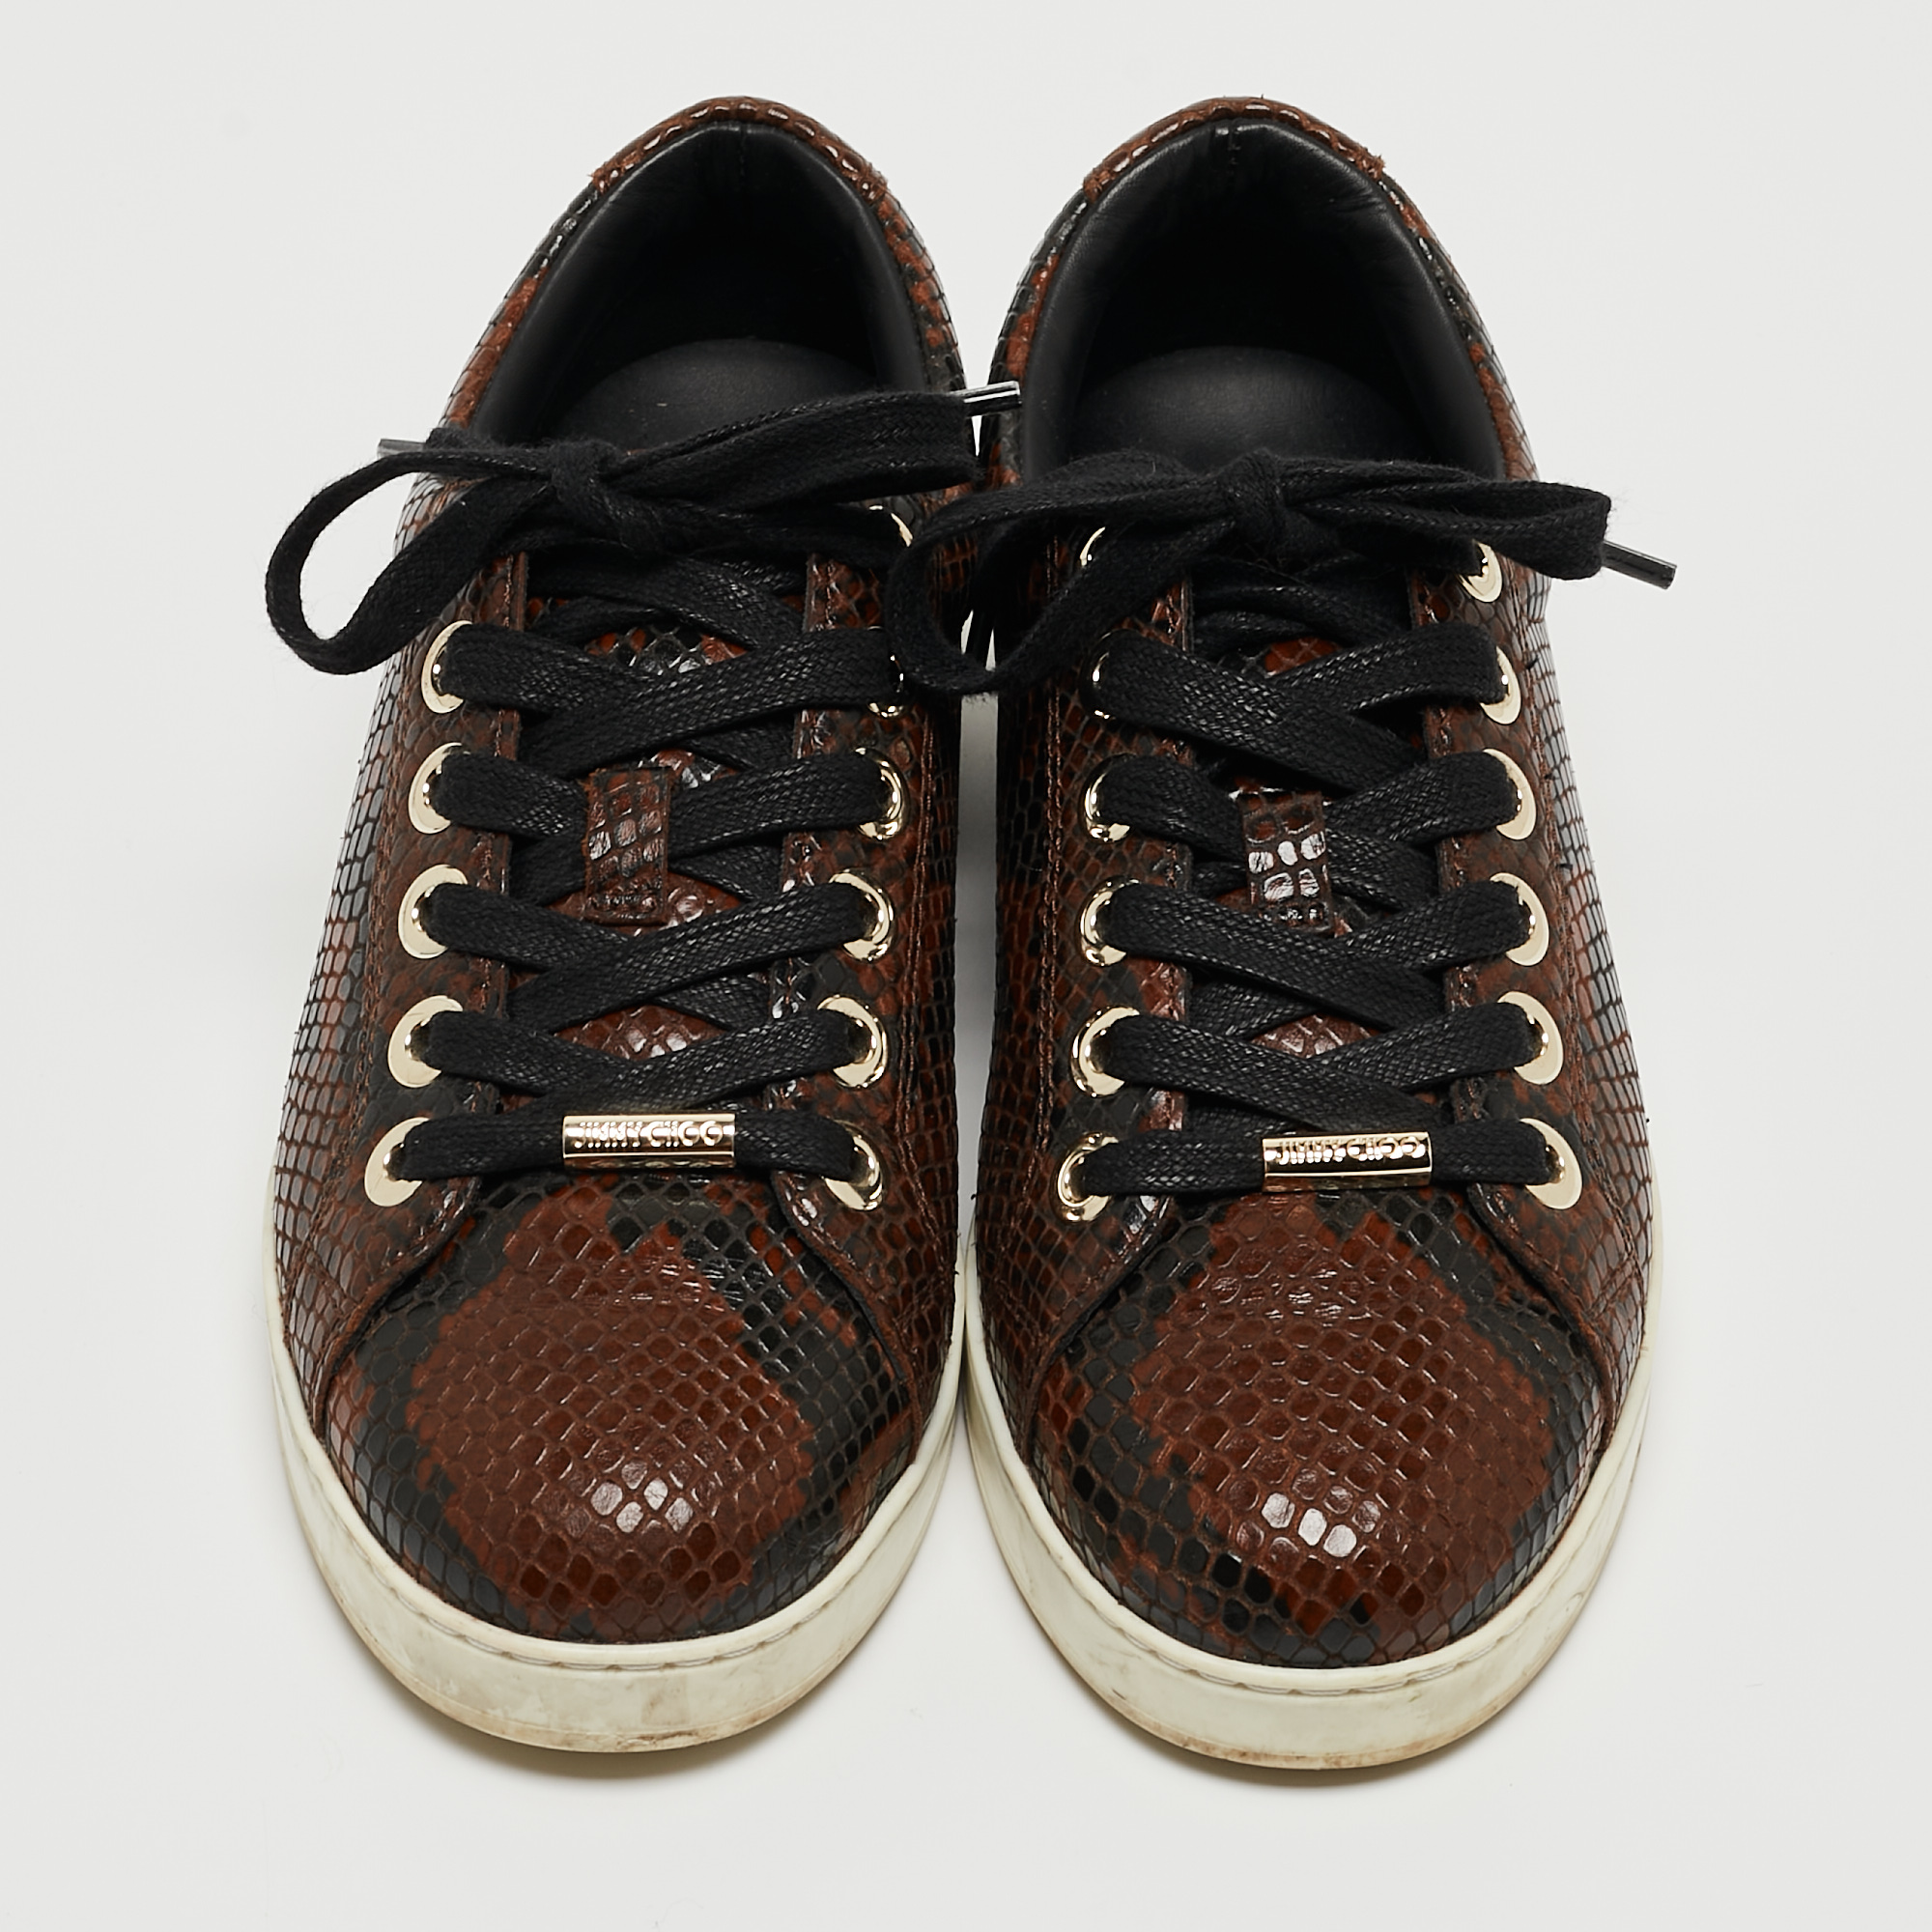 Jimmy Choo Brown Python Embossed Leather Lace Up Sneakers Size 36.5